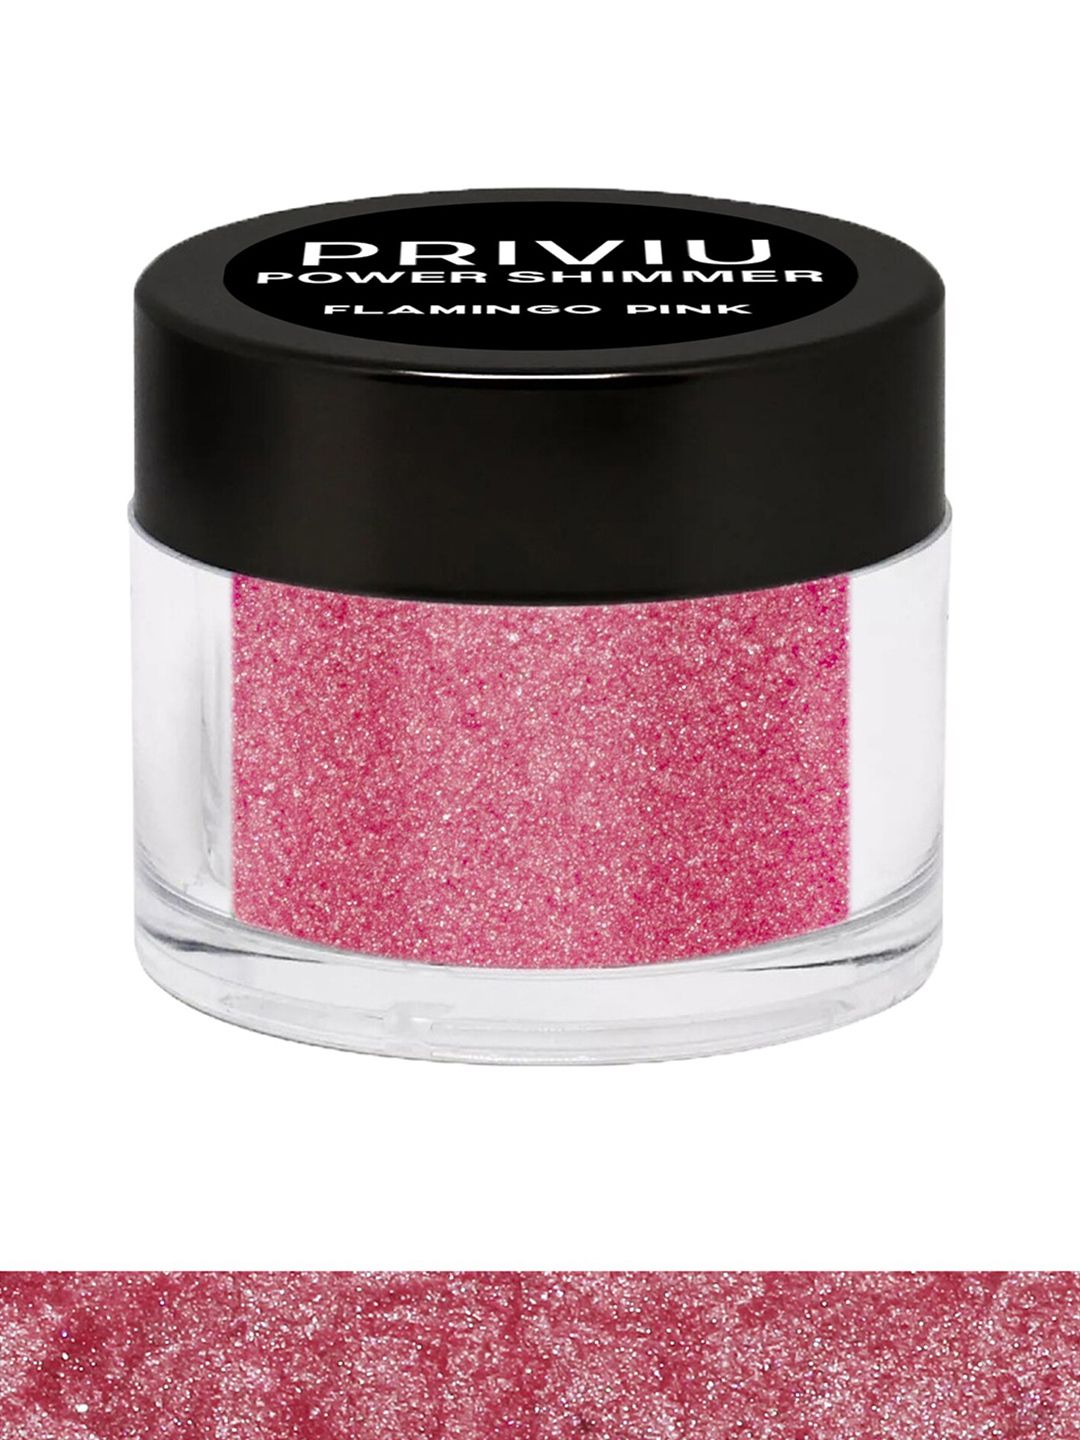 PRIVIU Power Shimmer For Eyes & Face Full Coverage Illuminator Highlighter-Flamingo Pink Price in India